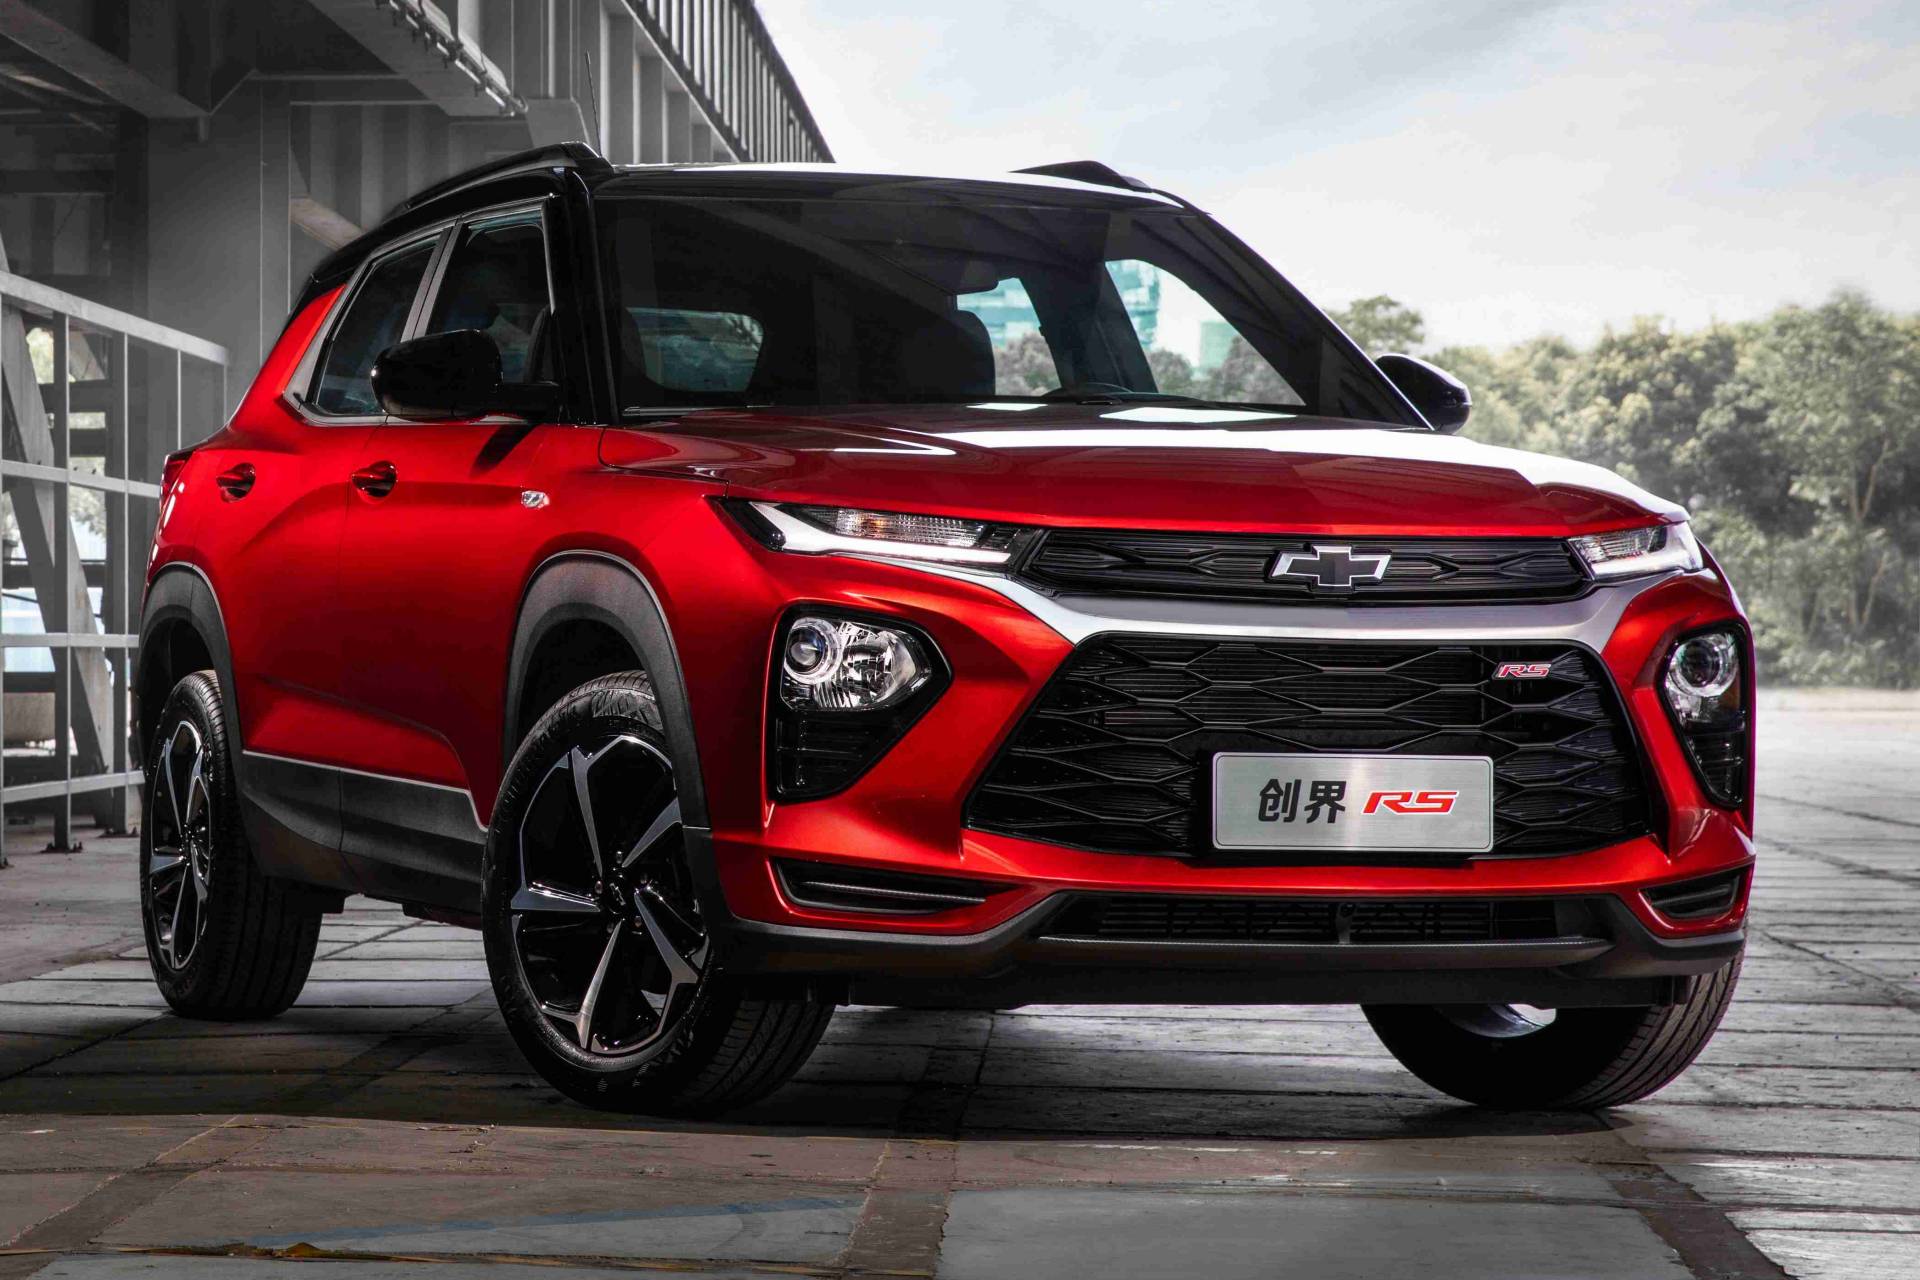 China s 2022 Chevy Trailblazer Launched With 162 HP 1 3L 